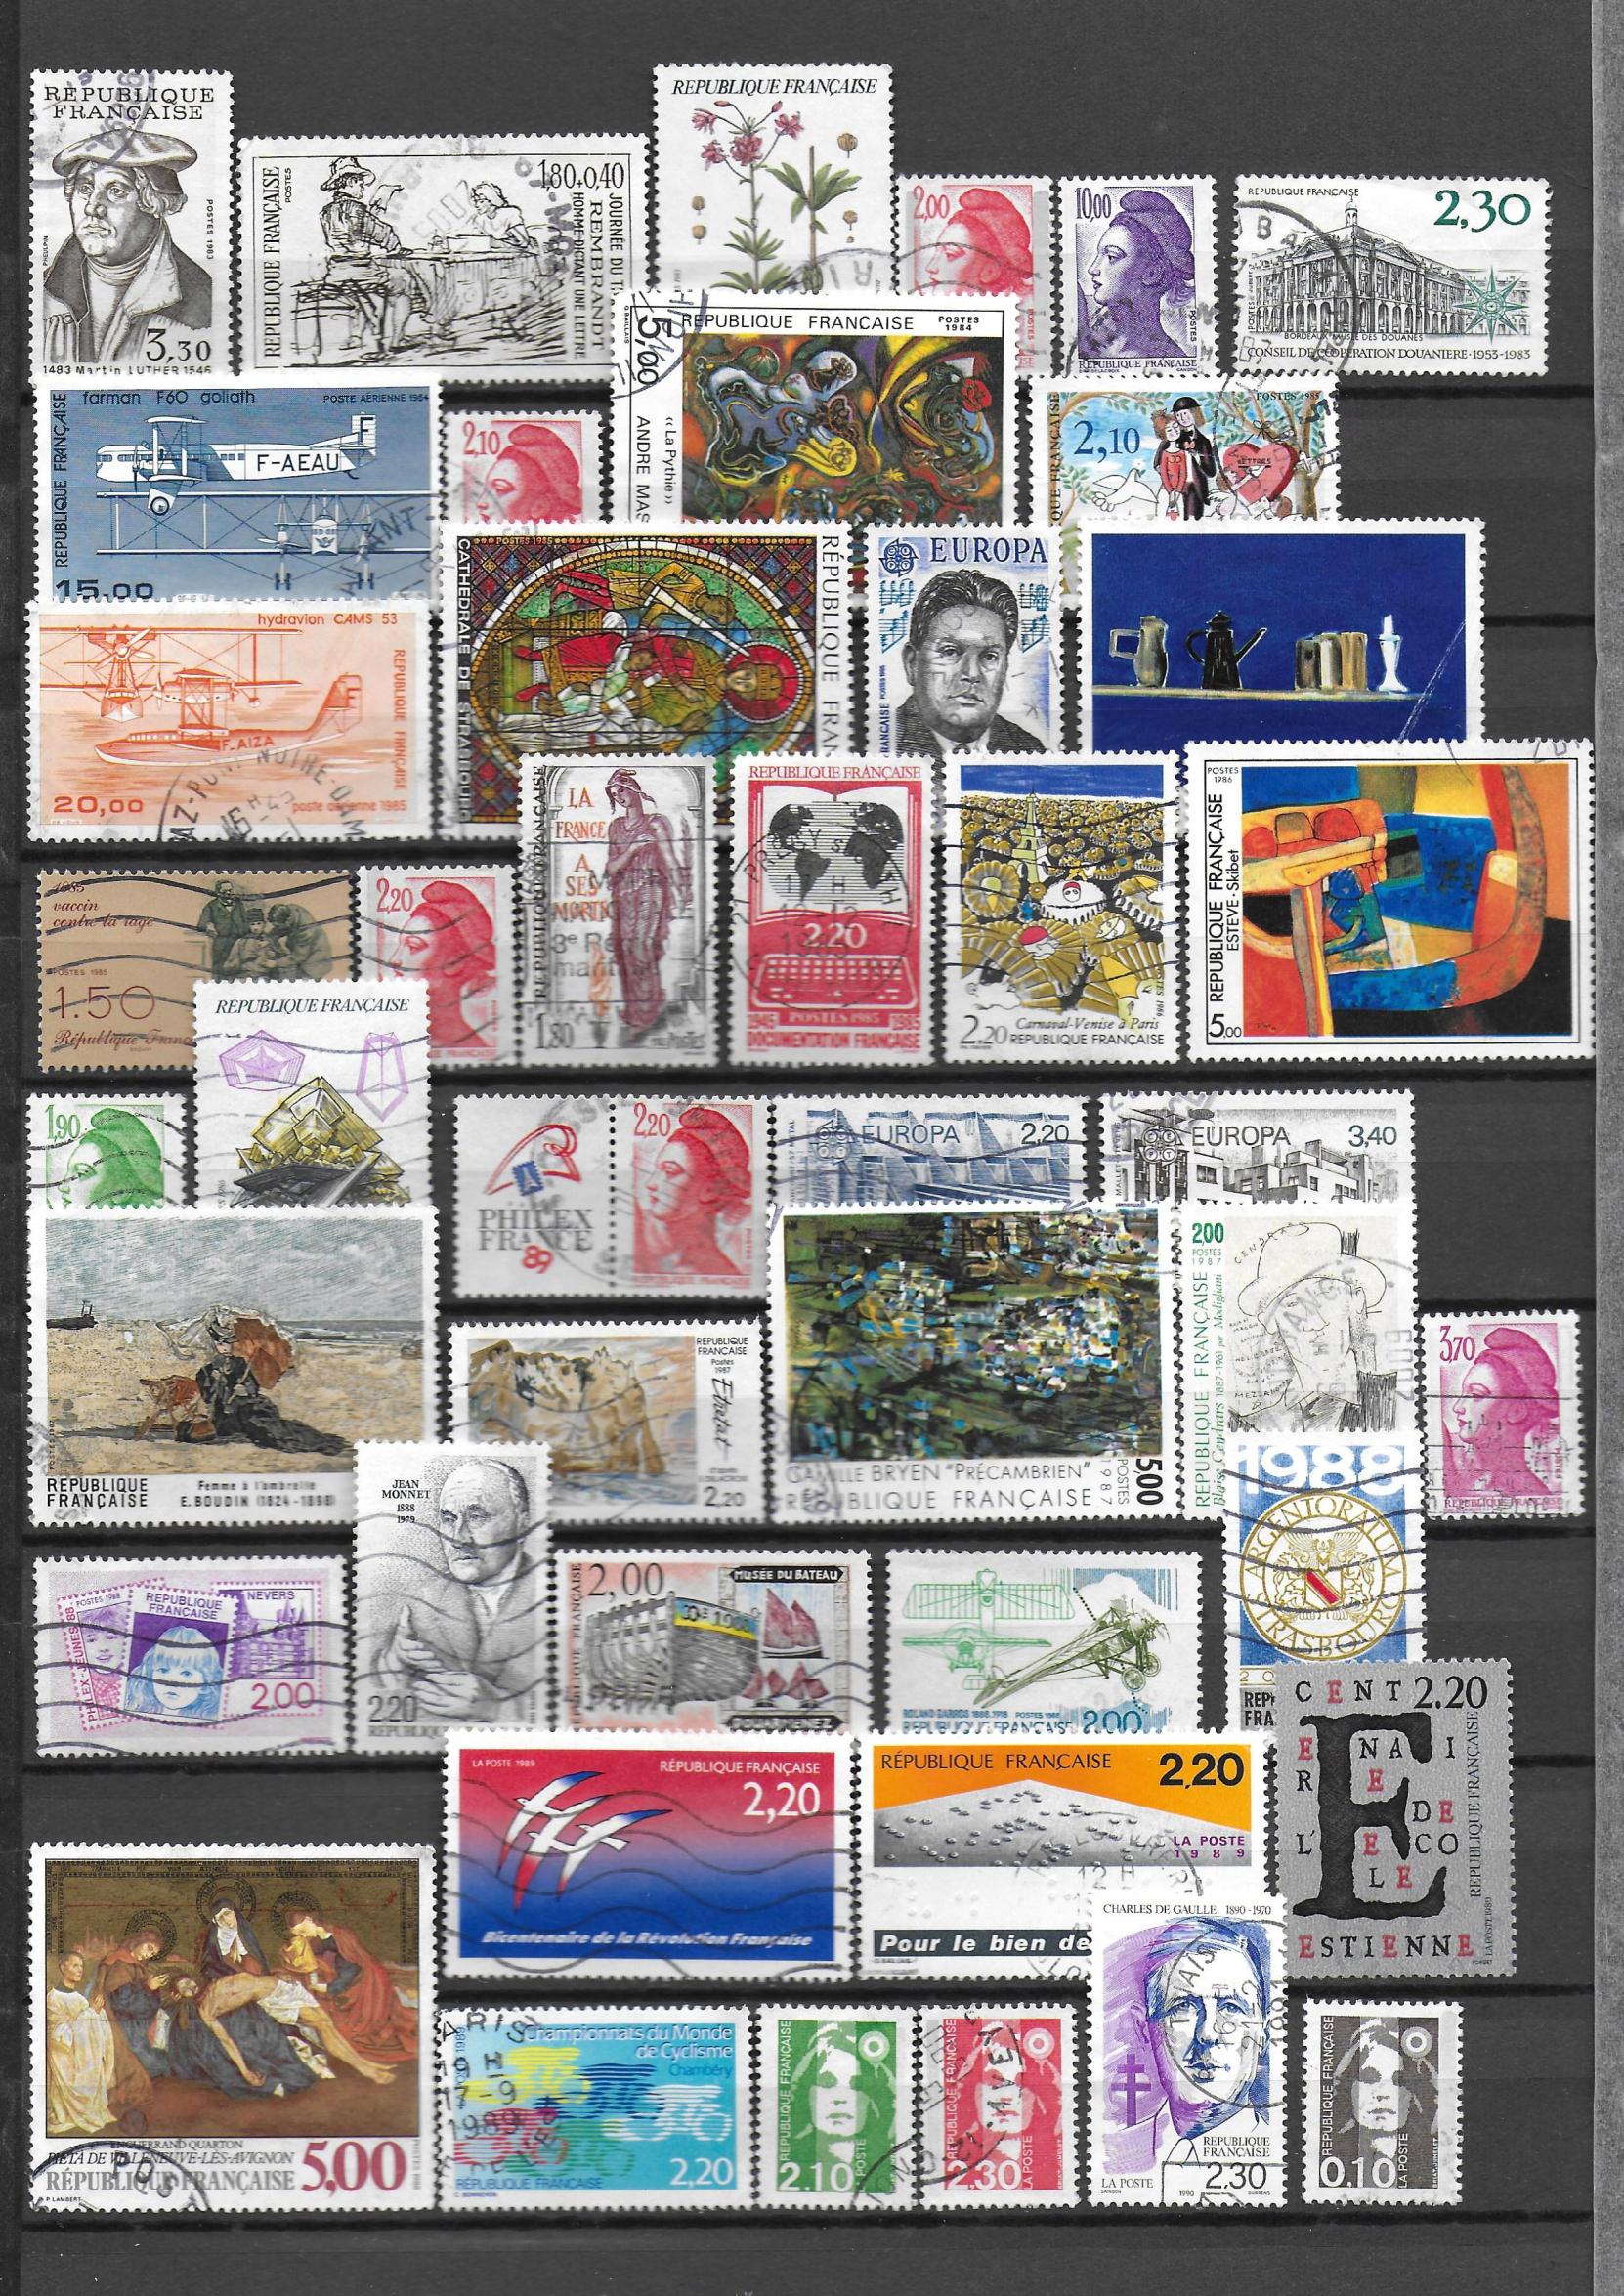 Timbres France 4 - Copie.jpg